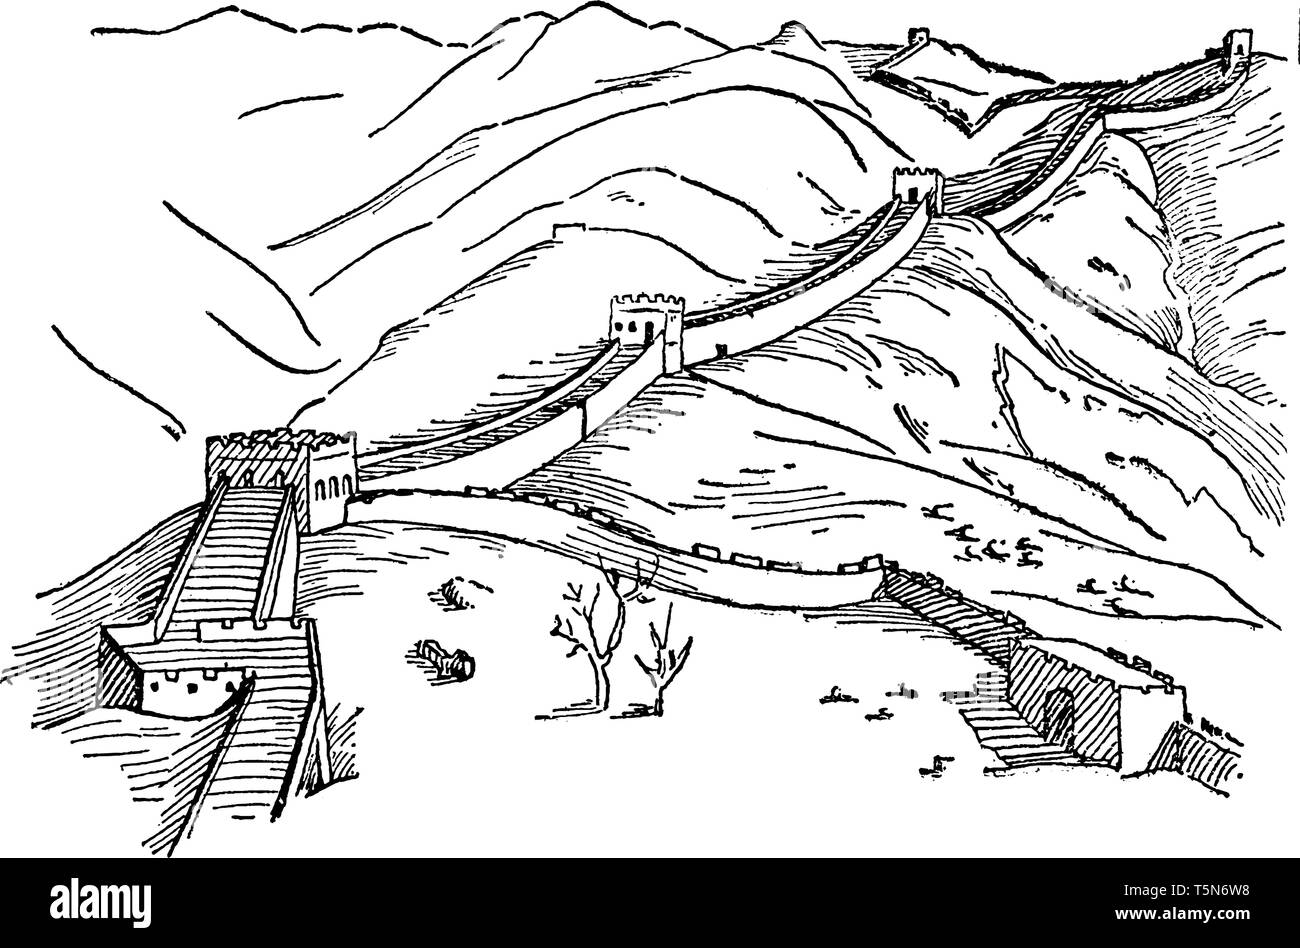 Great Wall Of China Which Is Feet High 40 Feet Wide 800 Miles Long Vintage Line Drawing Or Engraving Illustration Stock Vector Image Art Alamy